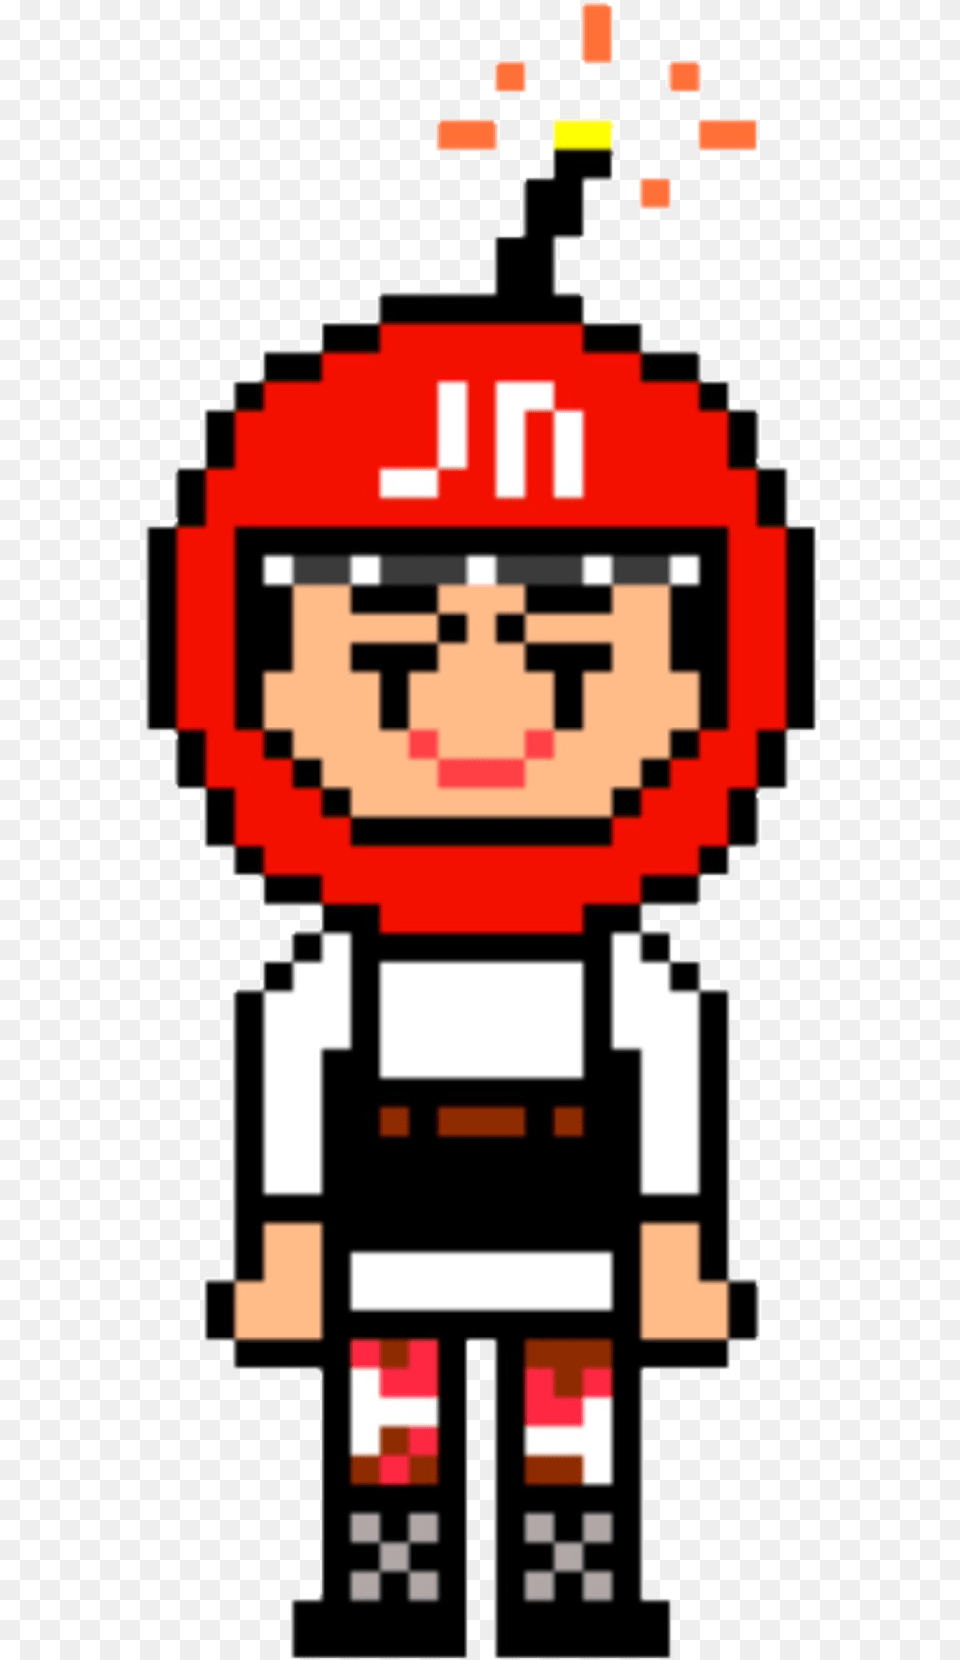 Nct Nct127 Johnny Cherrybomb Limitless Freetoedit Nct Cherry Bomb Pixel Taeyong, Nutcracker, Dynamite, Weapon Png Image